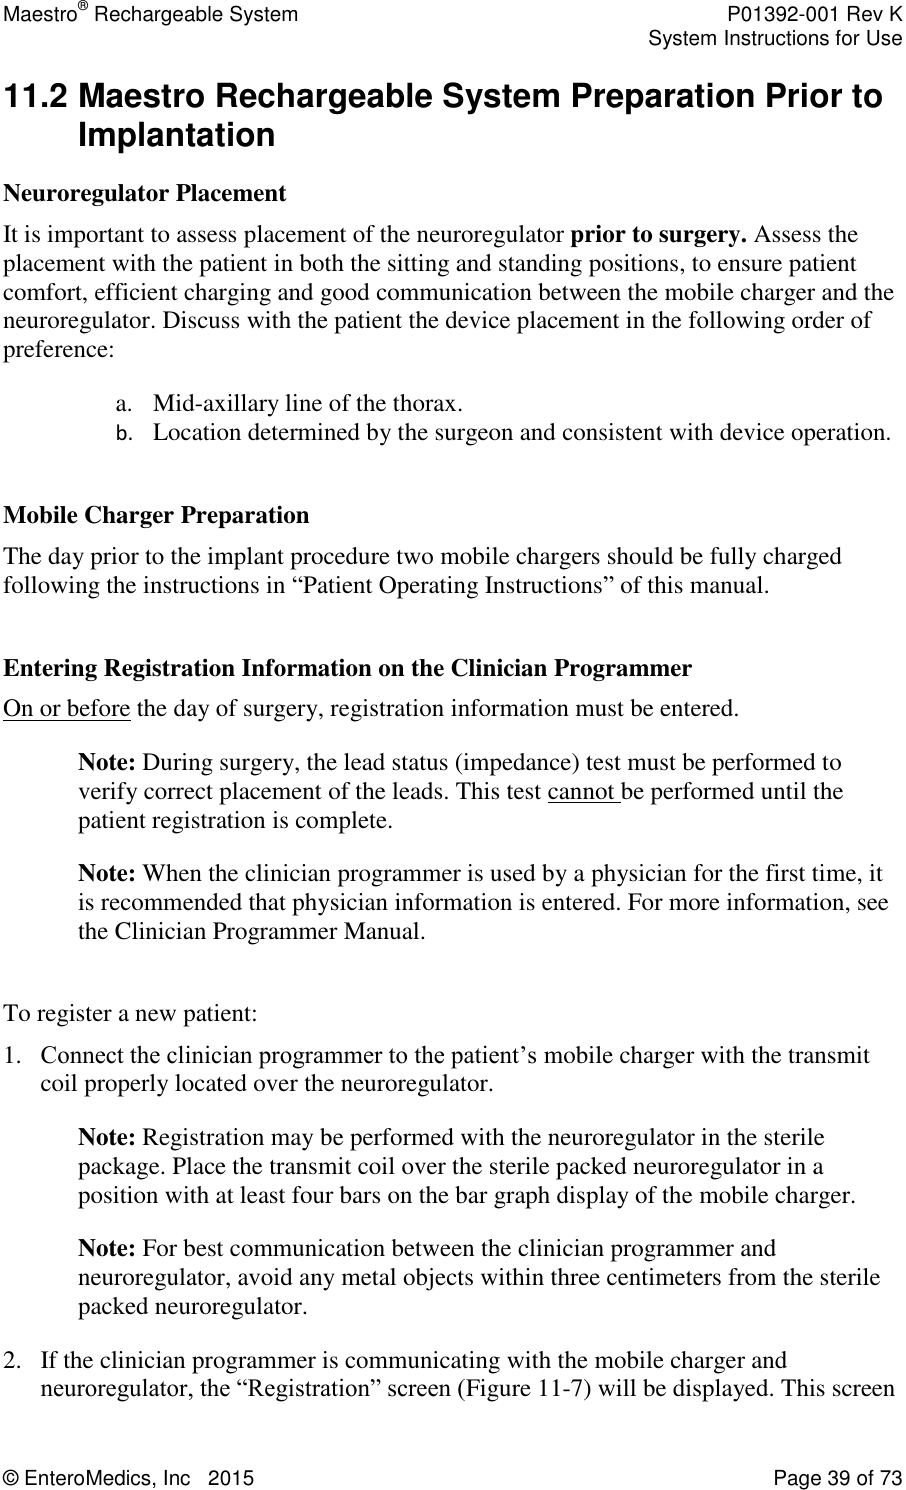 Maestro® Rechargeable System    P01392-001 Rev K     System Instructions for Use  © EnteroMedics, Inc   2015  Page 39 of 73  11.2 Maestro Rechargeable System Preparation Prior to Implantation Neuroregulator Placement It is important to assess placement of the neuroregulator prior to surgery. Assess the placement with the patient in both the sitting and standing positions, to ensure patient comfort, efficient charging and good communication between the mobile charger and the neuroregulator. Discuss with the patient the device placement in the following order of preference: a. Mid-axillary line of the thorax.  b. Location determined by the surgeon and consistent with device operation.  Mobile Charger Preparation  The day prior to the implant procedure two mobile chargers should be fully charged following the instructions in “Patient Operating Instructions” of this manual.  Entering Registration Information on the Clinician Programmer  On or before the day of surgery, registration information must be entered.  Note: During surgery, the lead status (impedance) test must be performed to verify correct placement of the leads. This test cannot be performed until the patient registration is complete.  Note: When the clinician programmer is used by a physician for the first time, it is recommended that physician information is entered. For more information, see the Clinician Programmer Manual.  To register a new patient: 1. Connect the clinician programmer to the patient’s mobile charger with the transmit coil properly located over the neuroregulator.  Note: Registration may be performed with the neuroregulator in the sterile package. Place the transmit coil over the sterile packed neuroregulator in a position with at least four bars on the bar graph display of the mobile charger.  Note: For best communication between the clinician programmer and neuroregulator, avoid any metal objects within three centimeters from the sterile packed neuroregulator. 2. If the clinician programmer is communicating with the mobile charger and neuroregulator, the “Registration” screen (Figure 11-7) will be displayed. This screen 